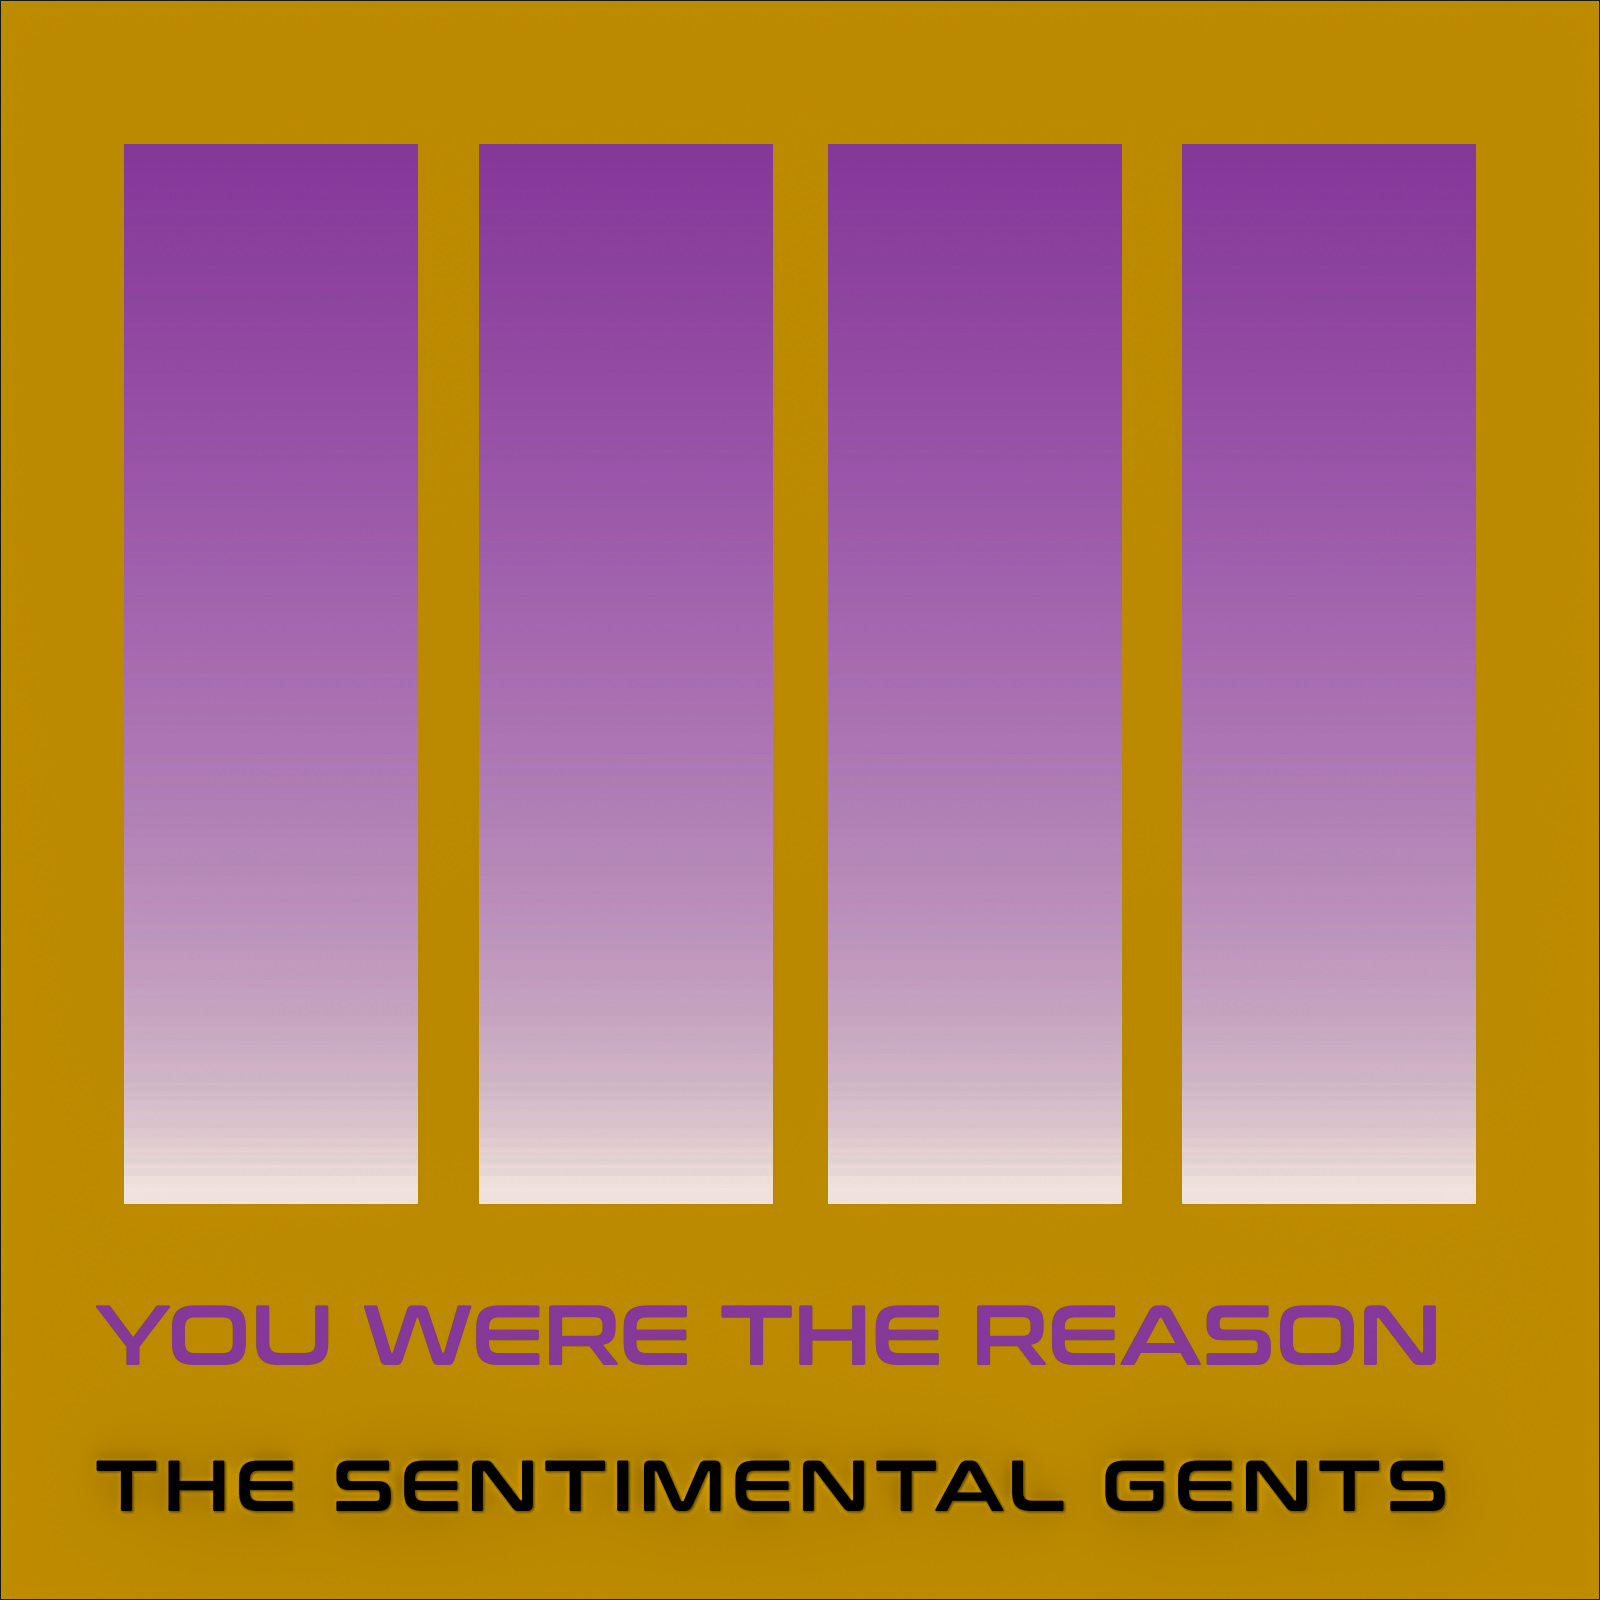 Heritage from The 70’s and 80’s: Introducing to the Masses The Sentimental Gents